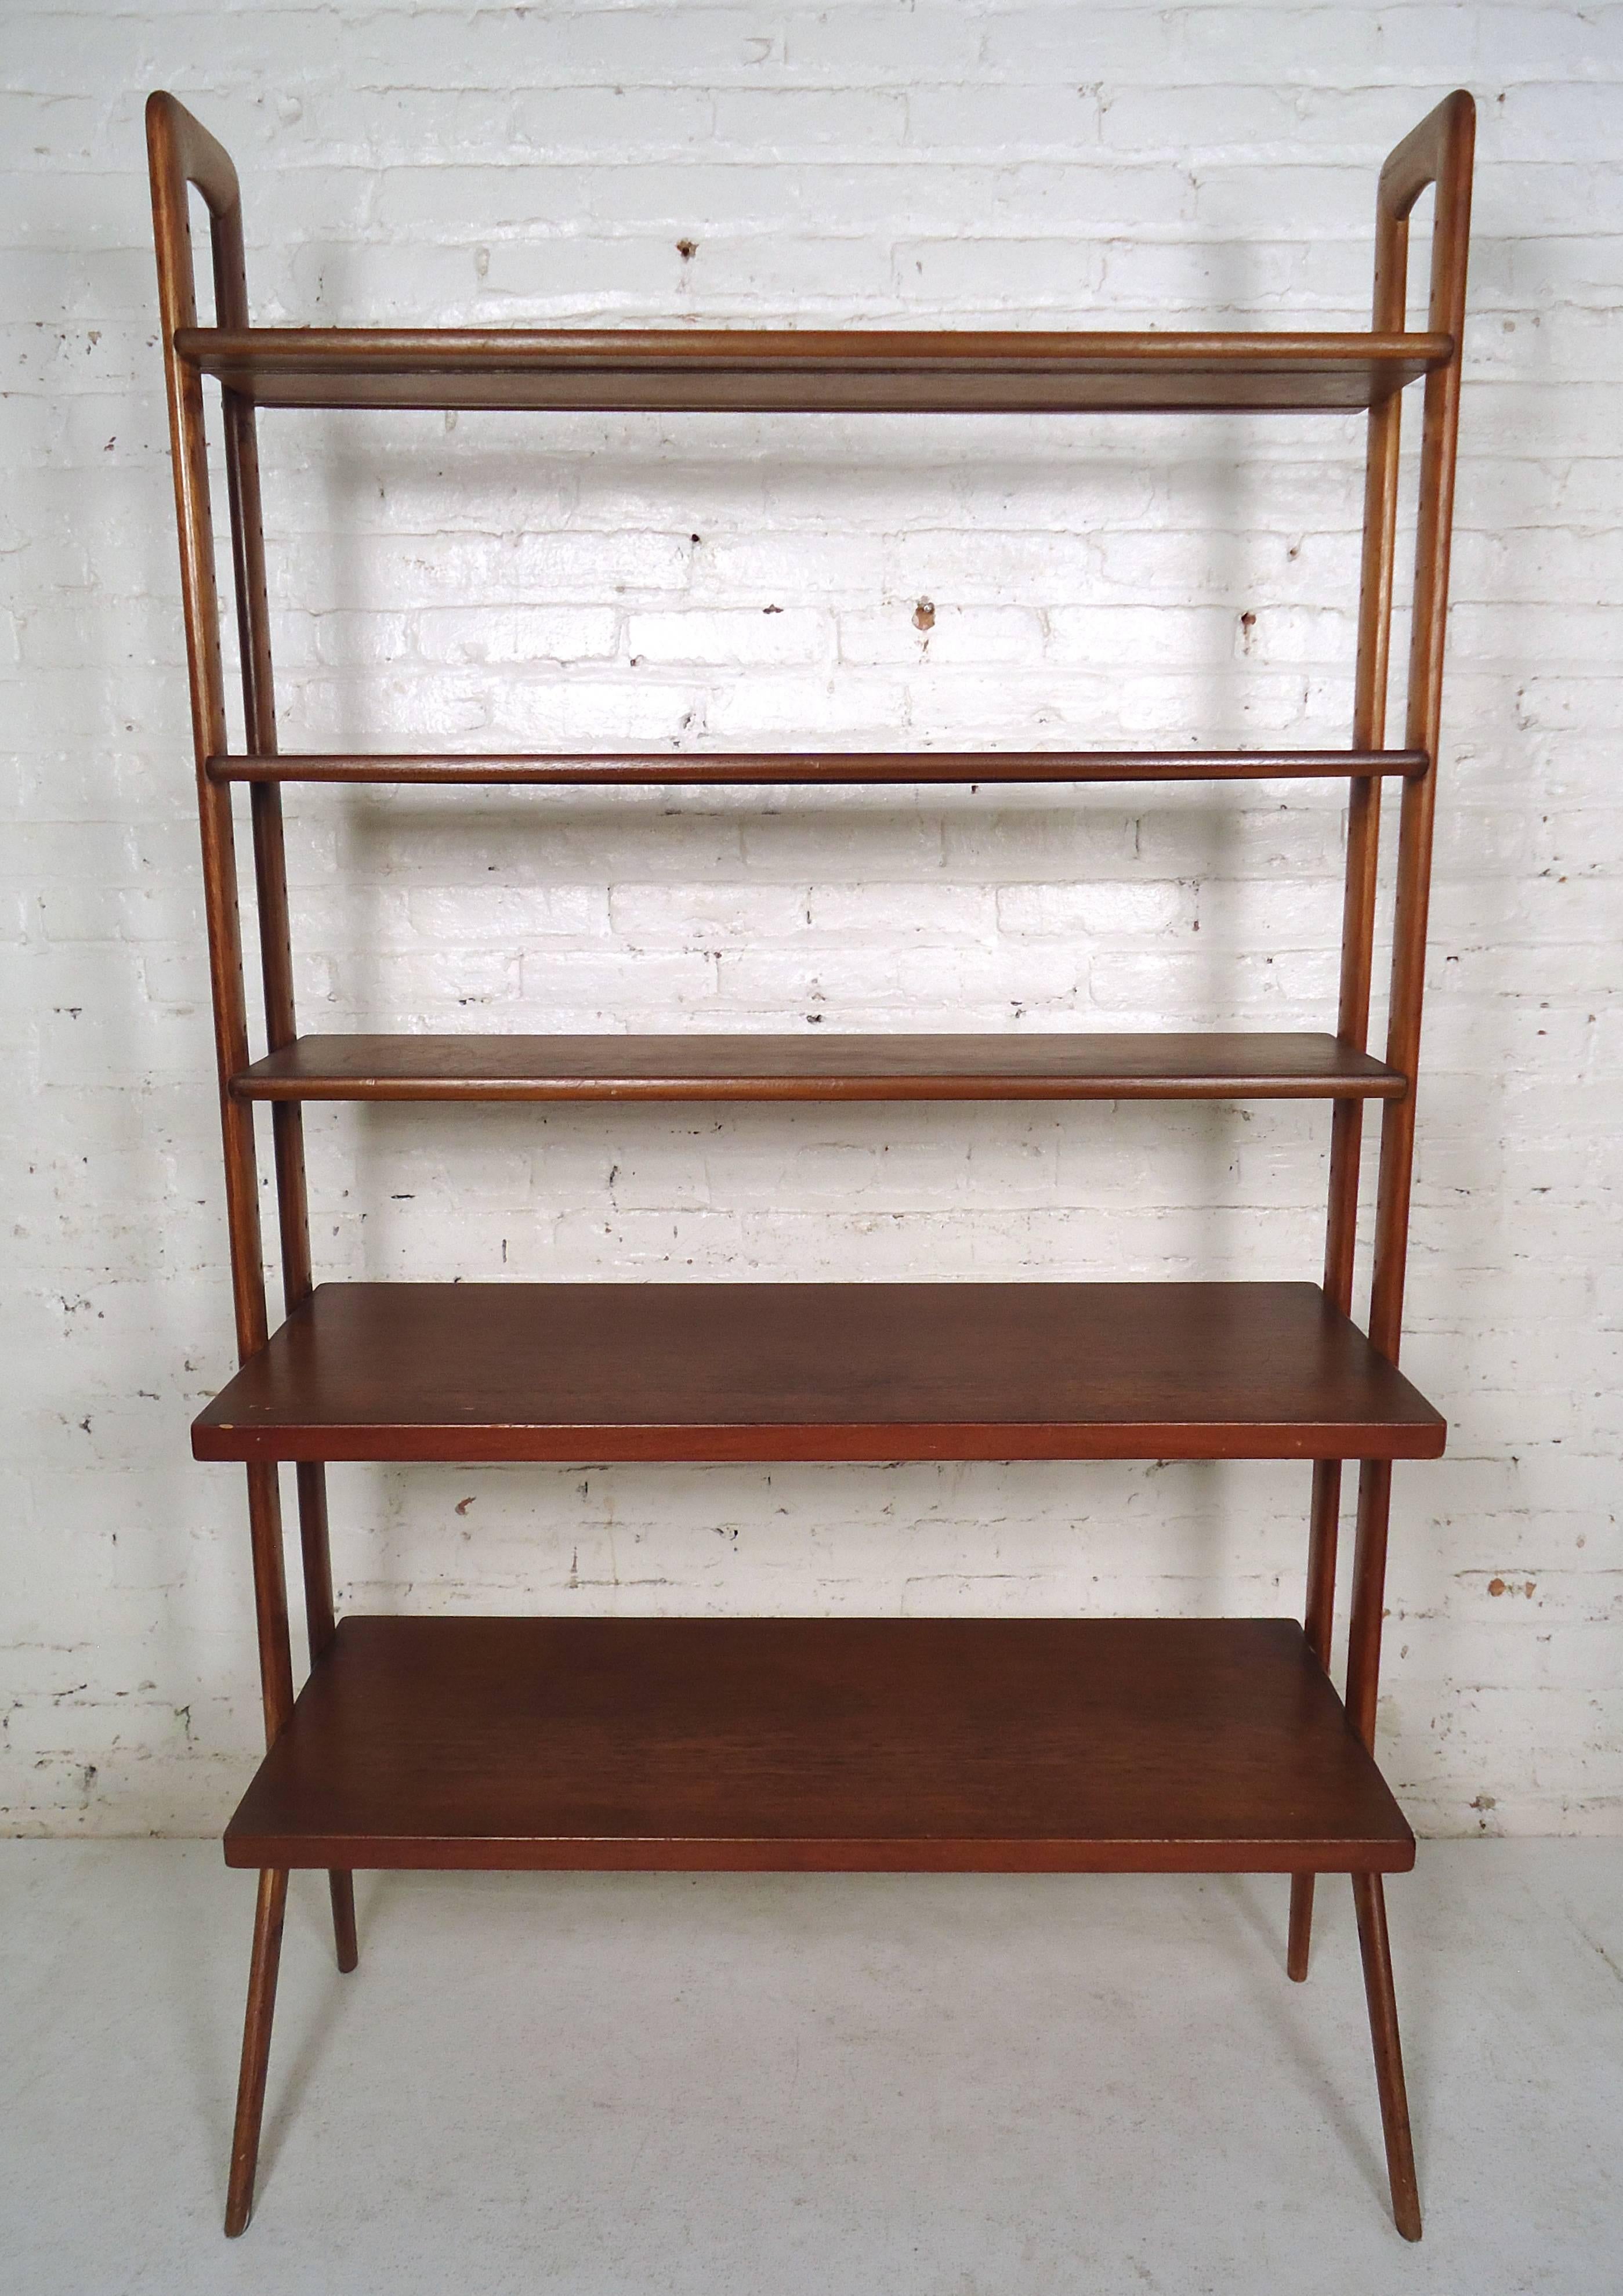 Elegant vintage modern Danish bookcase features rich teak wood grain, many shelves, and a set of sturdy legs.

Please confirm item location (NY or NJ).